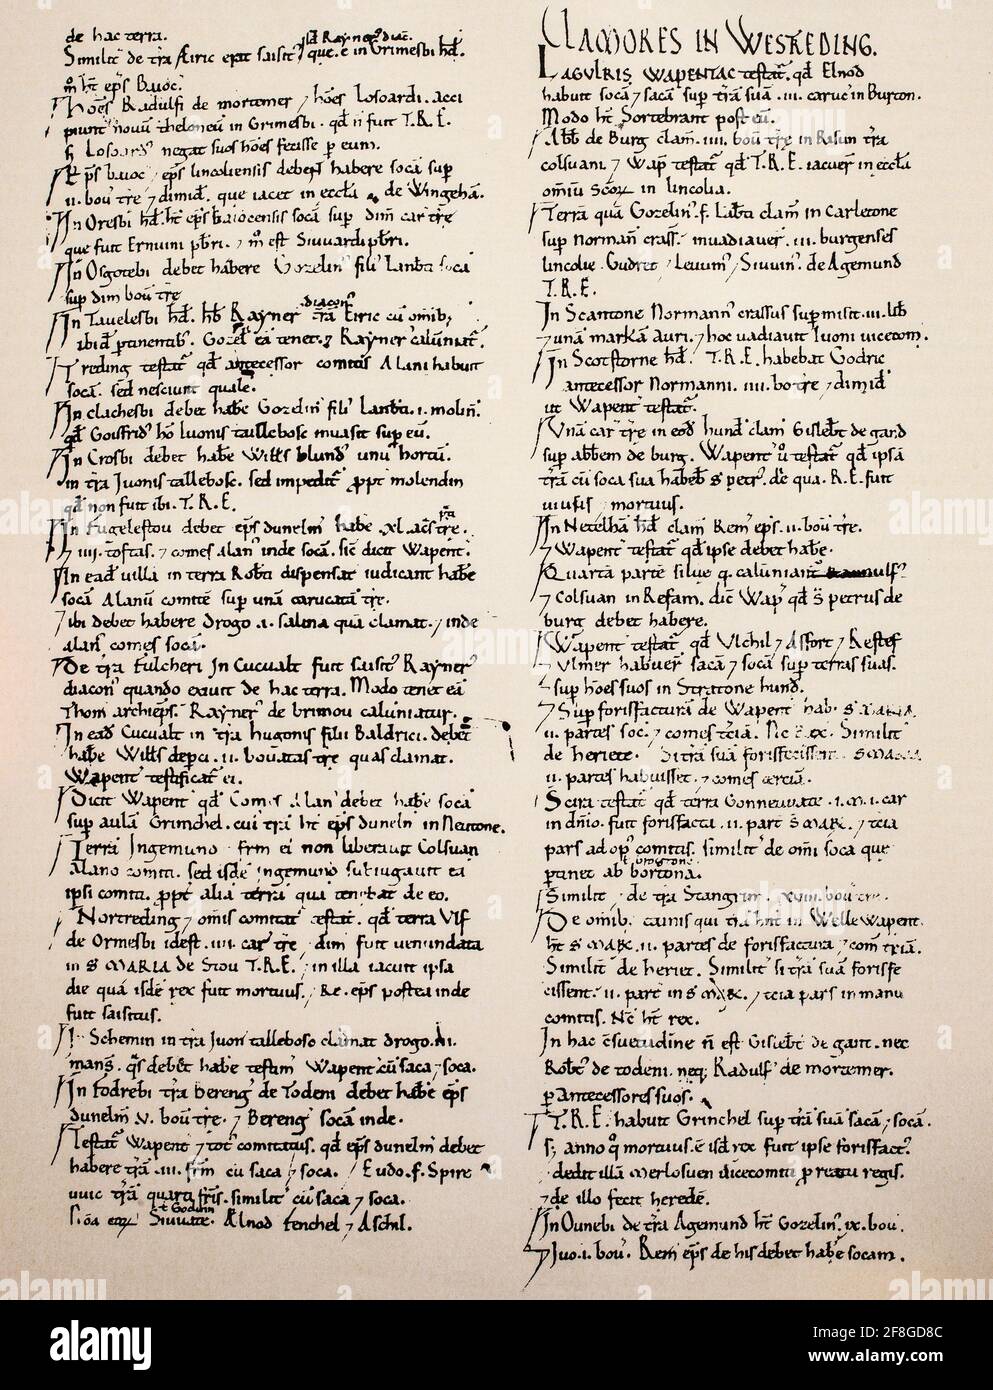 A page from the Little Domesday Book, the first draft or ‘circuit summary’ covering the counties of Essex, Norfolk and Suffolk. Because the information from Little Domesday was never entered into Great Domesday, Little Domesday was kept as the final record for East Anglia. Stock Photo